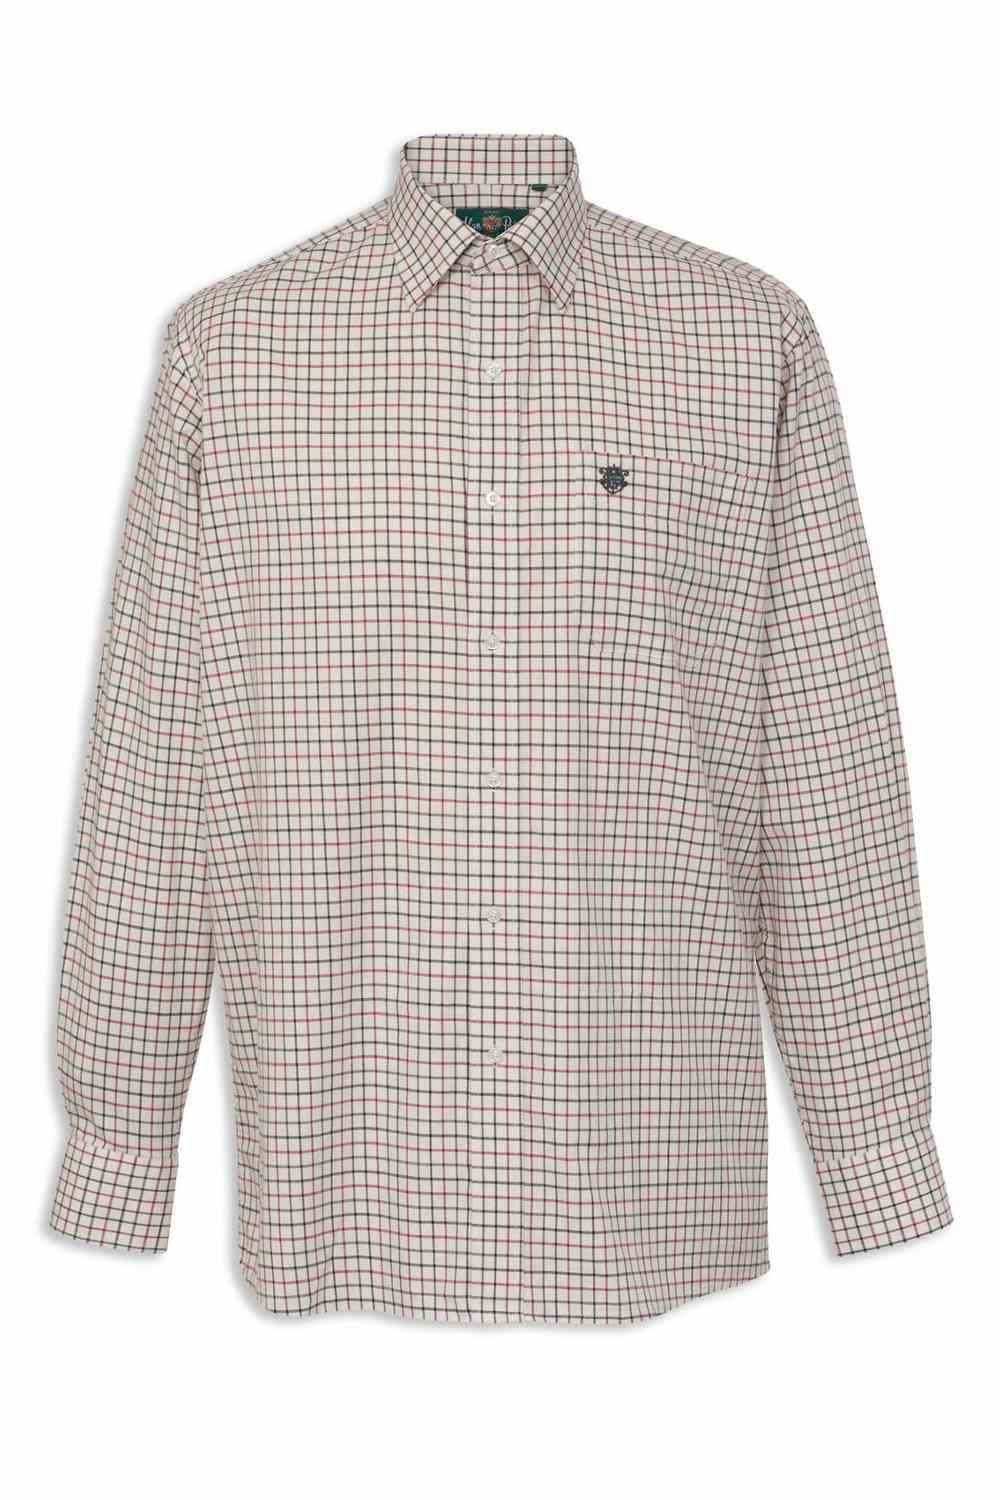 Alan Paine Ilkley Kids Tattersall Shirt in Red Green Check 